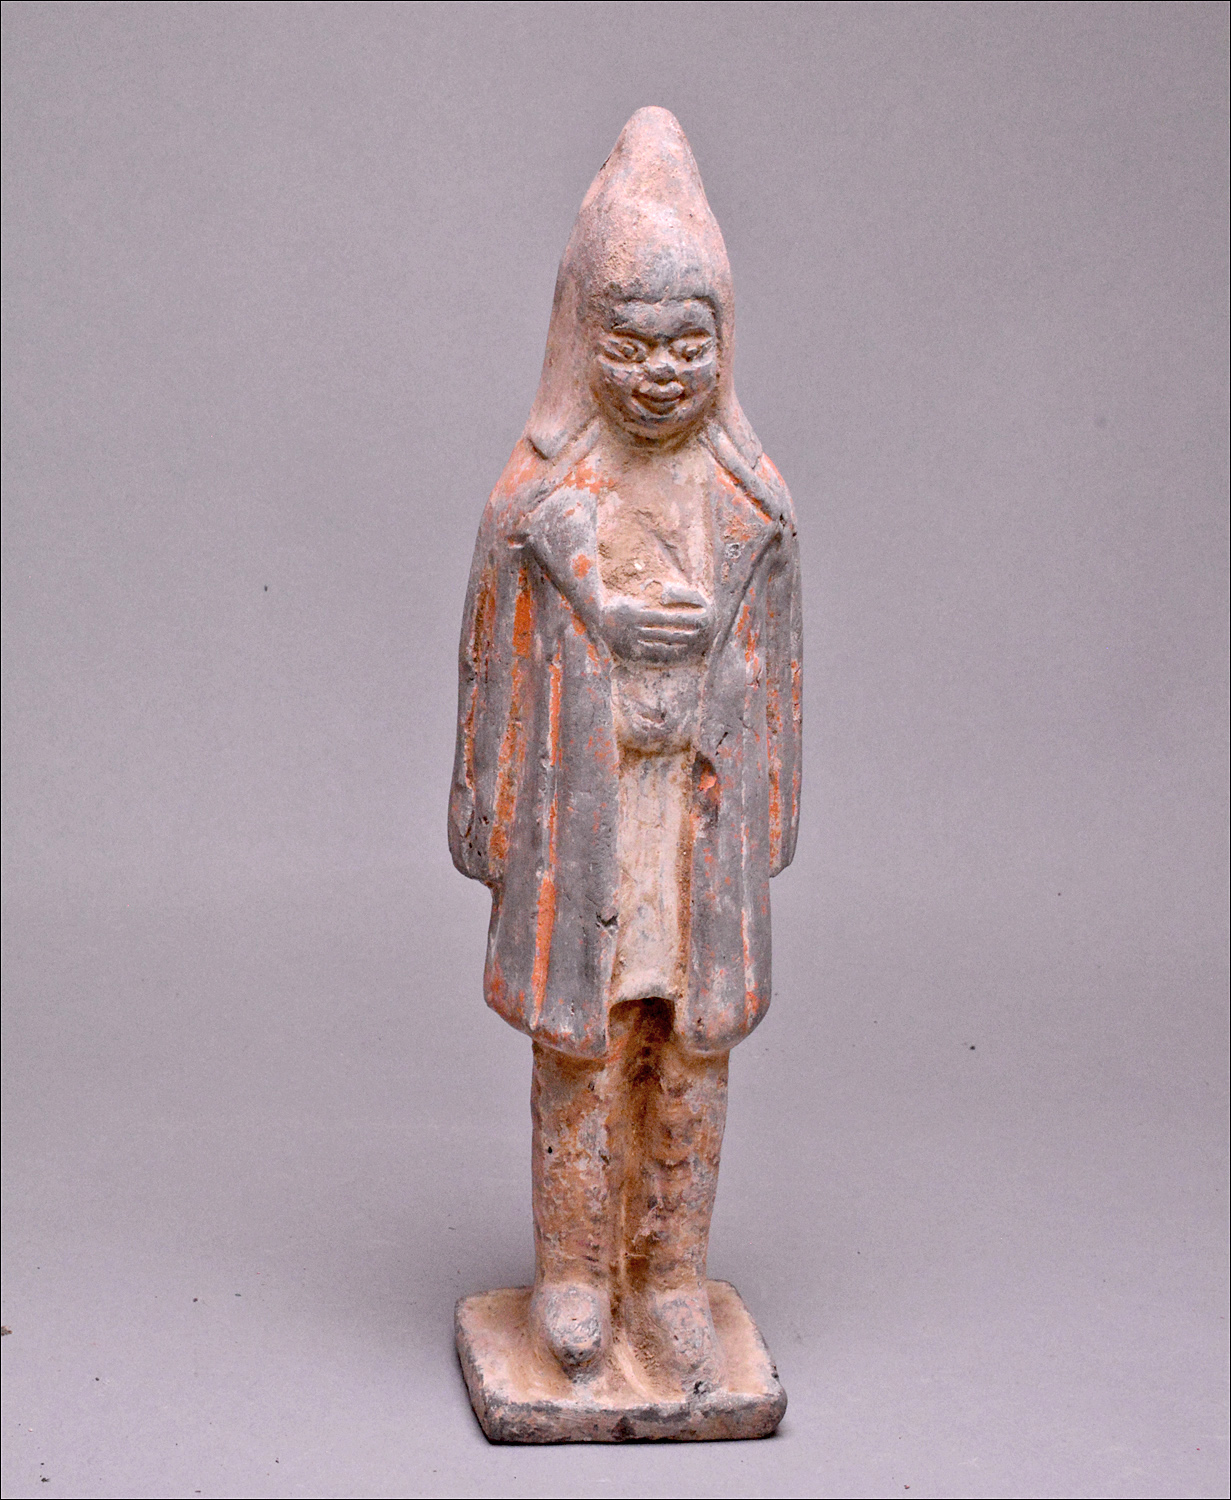 T’ang dynasty terracotta figure.